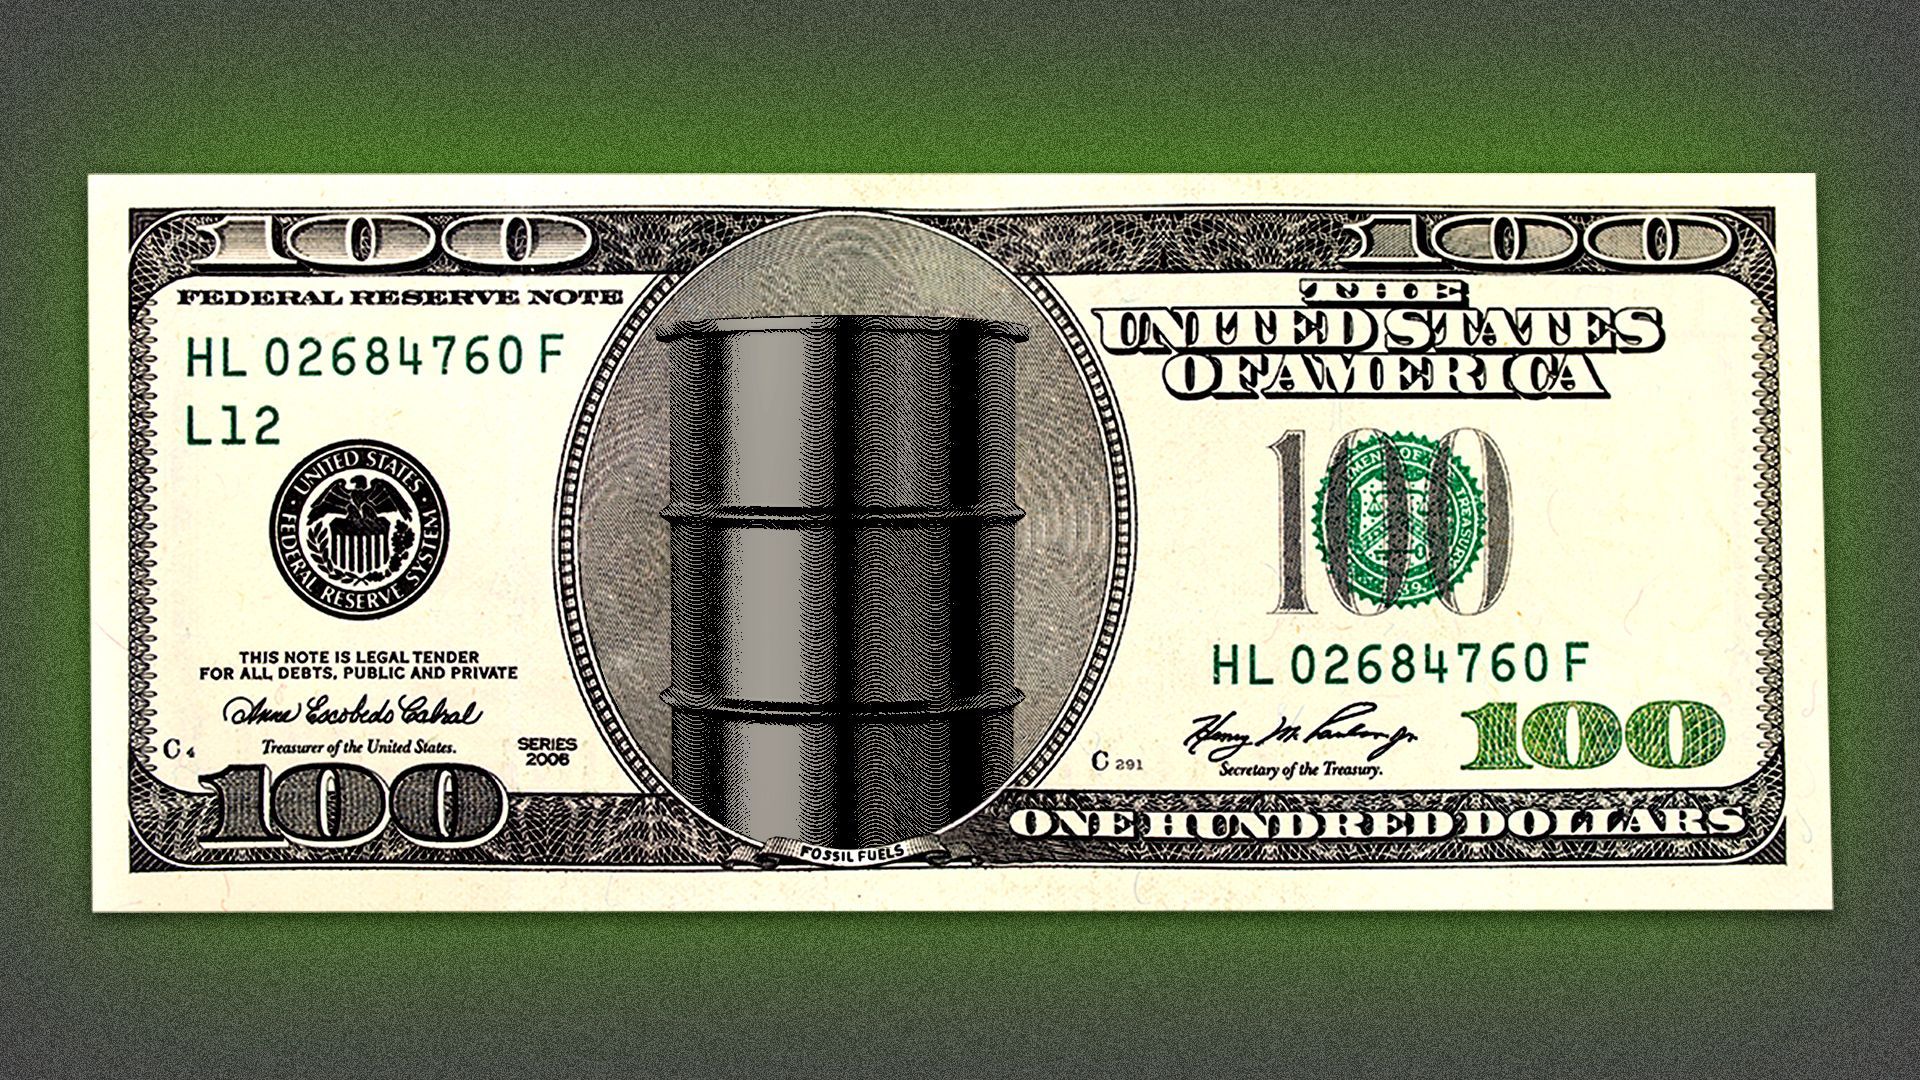 Illustration of a one hundred dollar bill with a barrel of oil in place of Franklin.